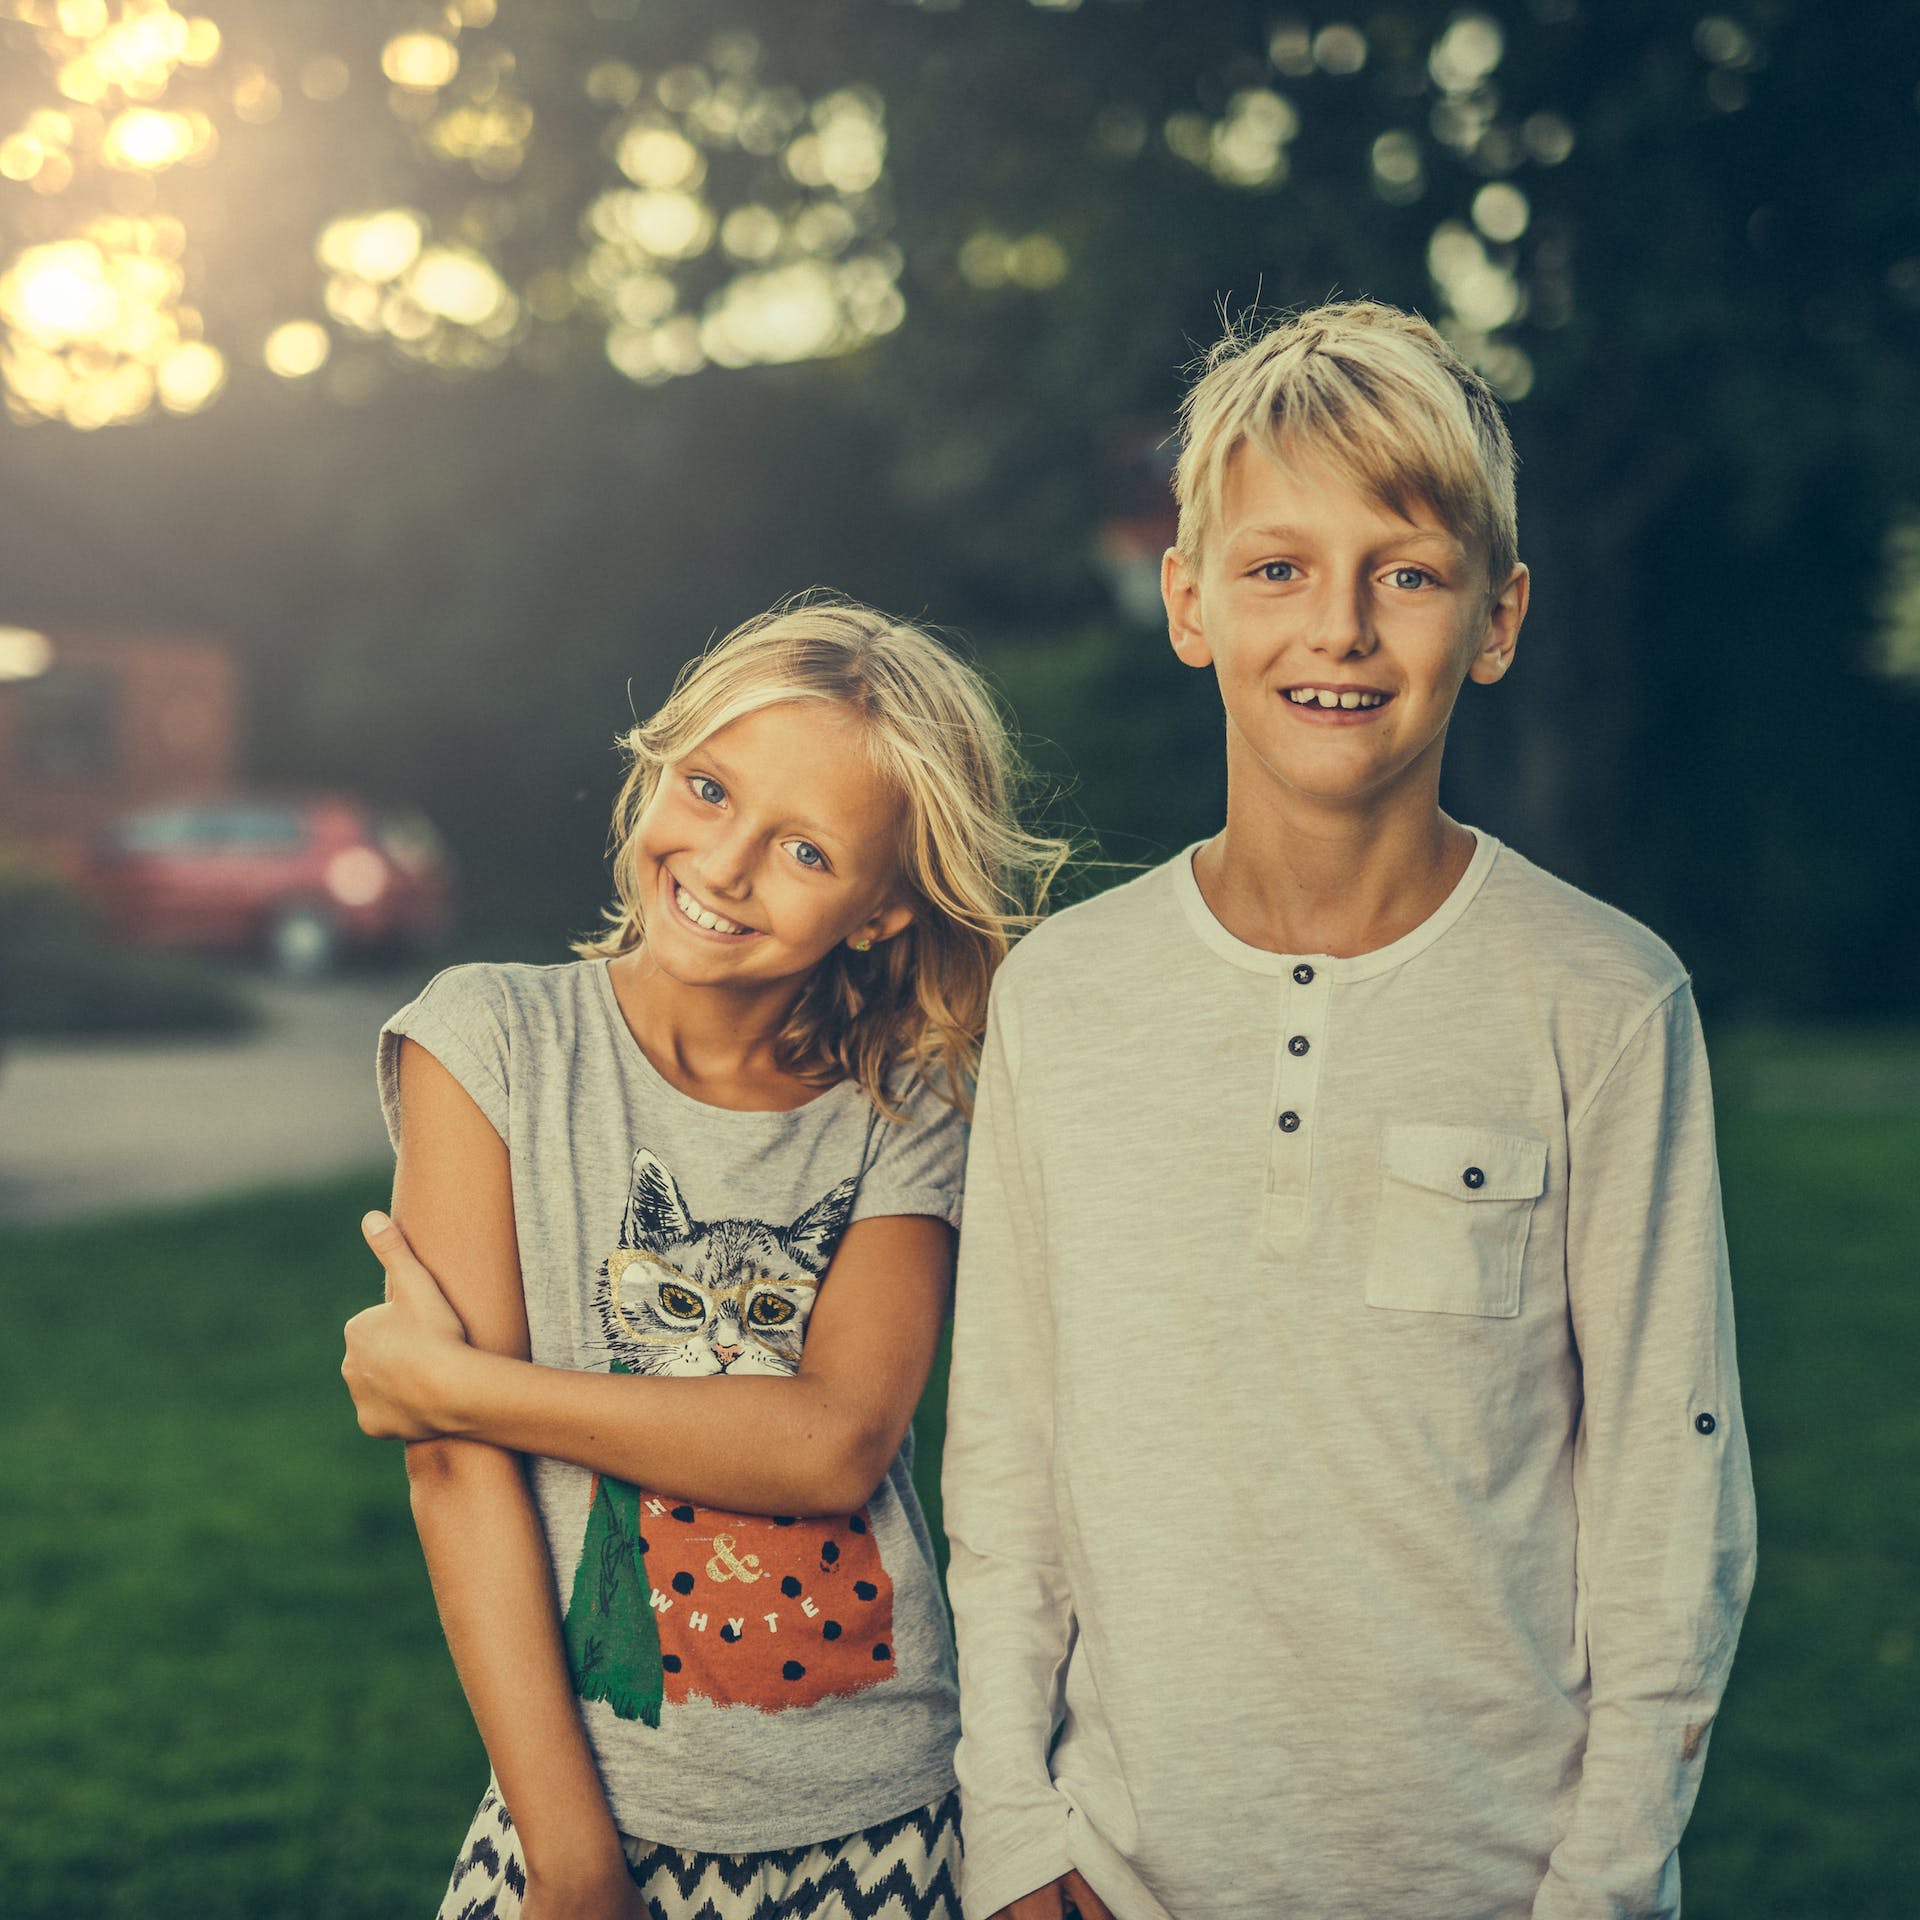 A young girl and boy | Source: Pexels